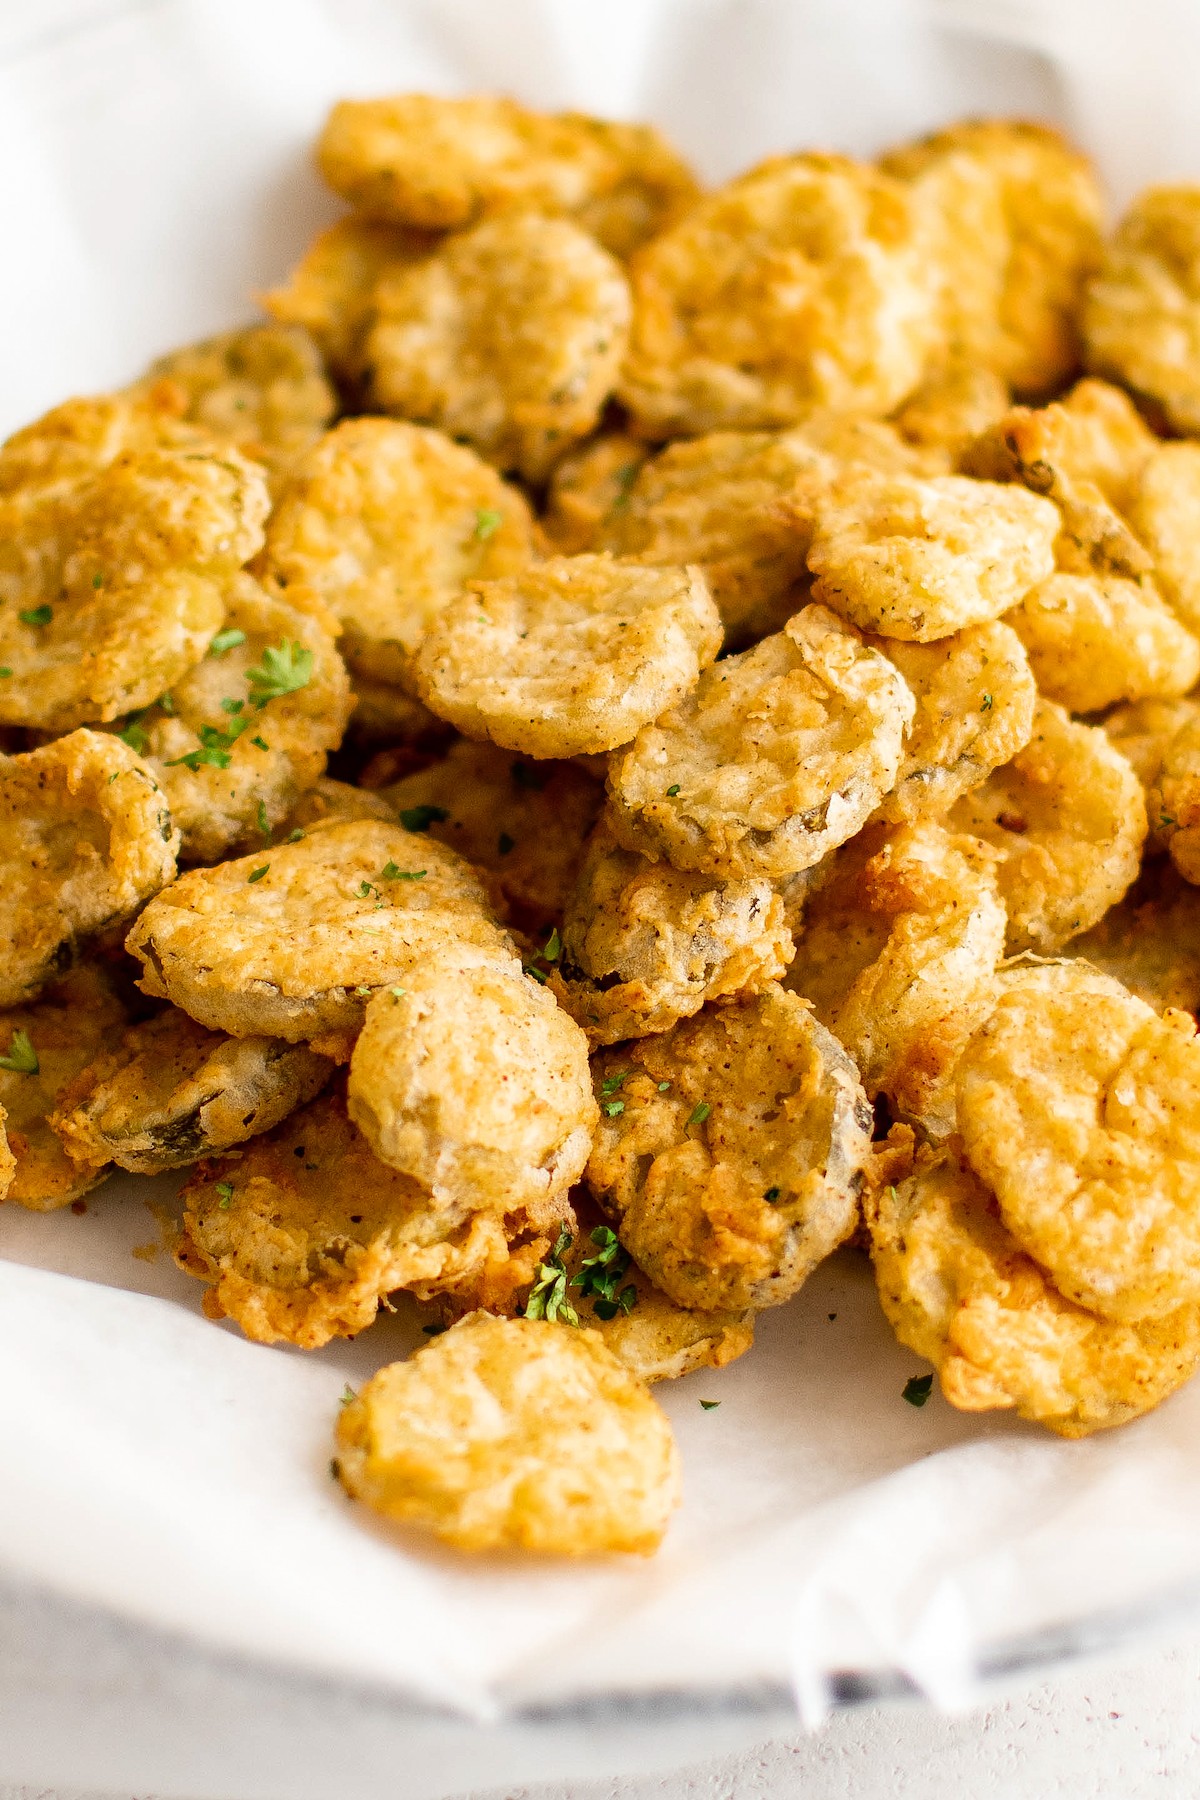 Homemade fried pickles in a white dish.